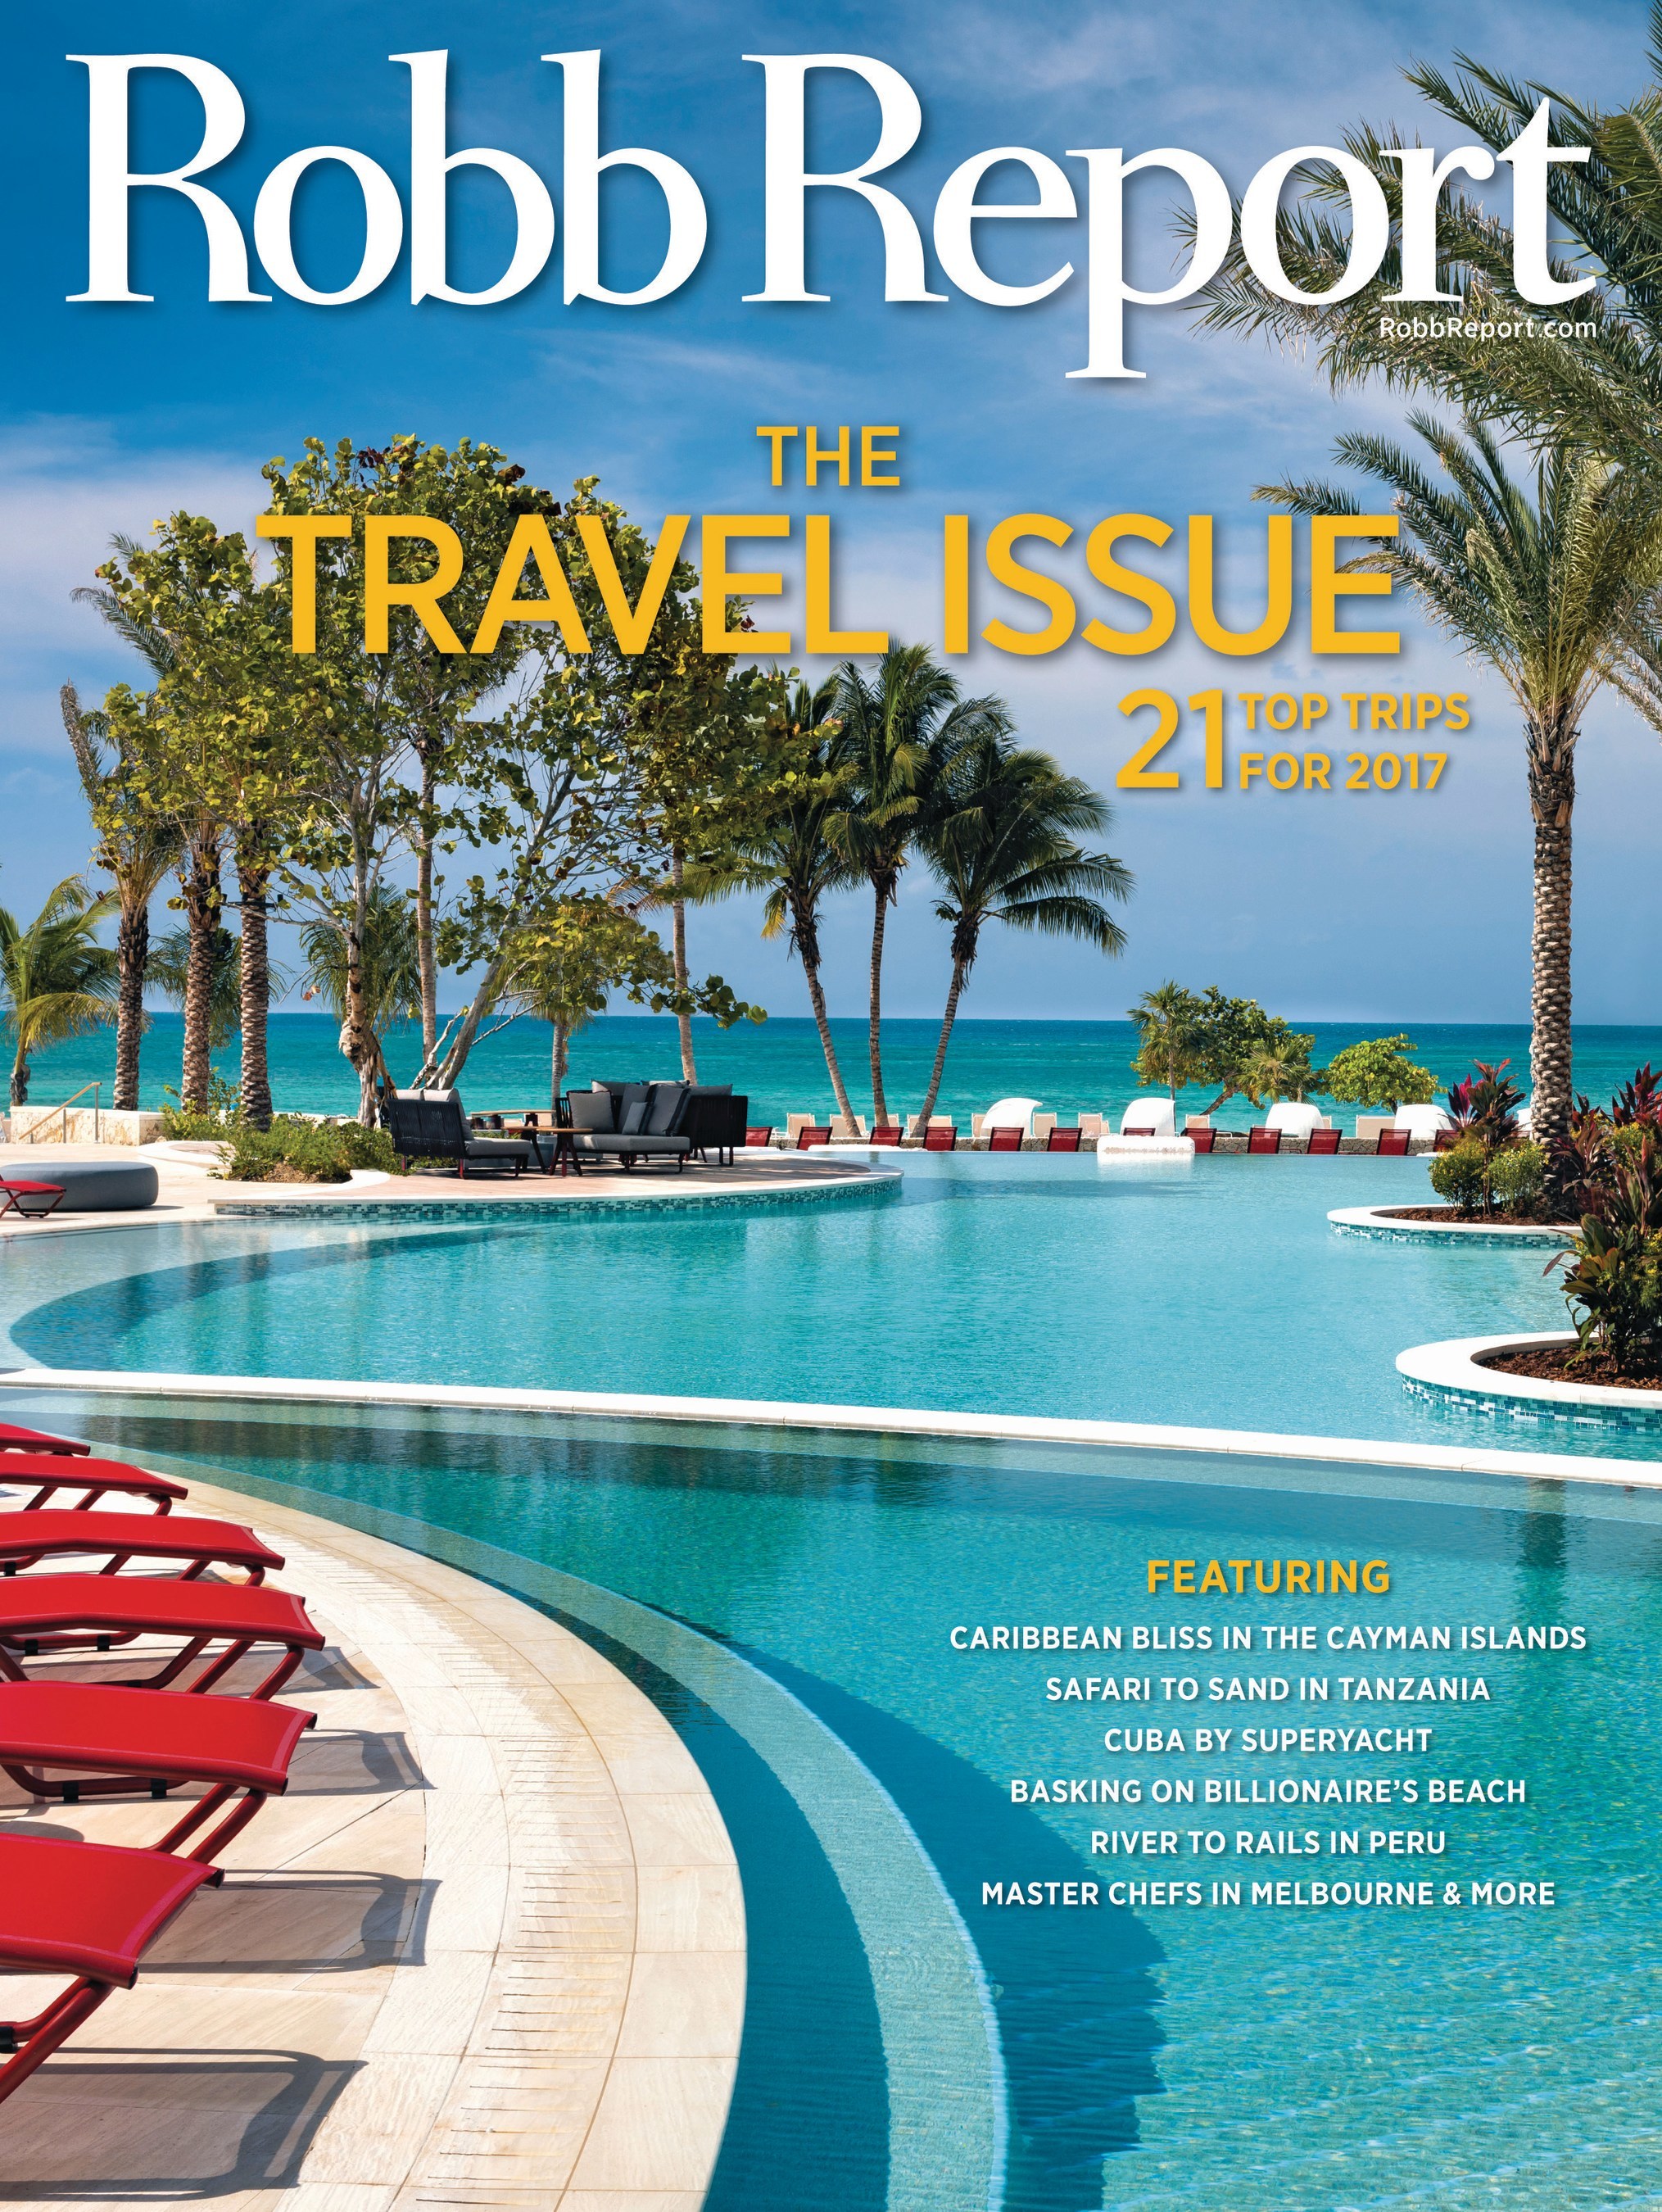 Robb Report Reveals Top Trips For 2017 With Annual Travel Issue